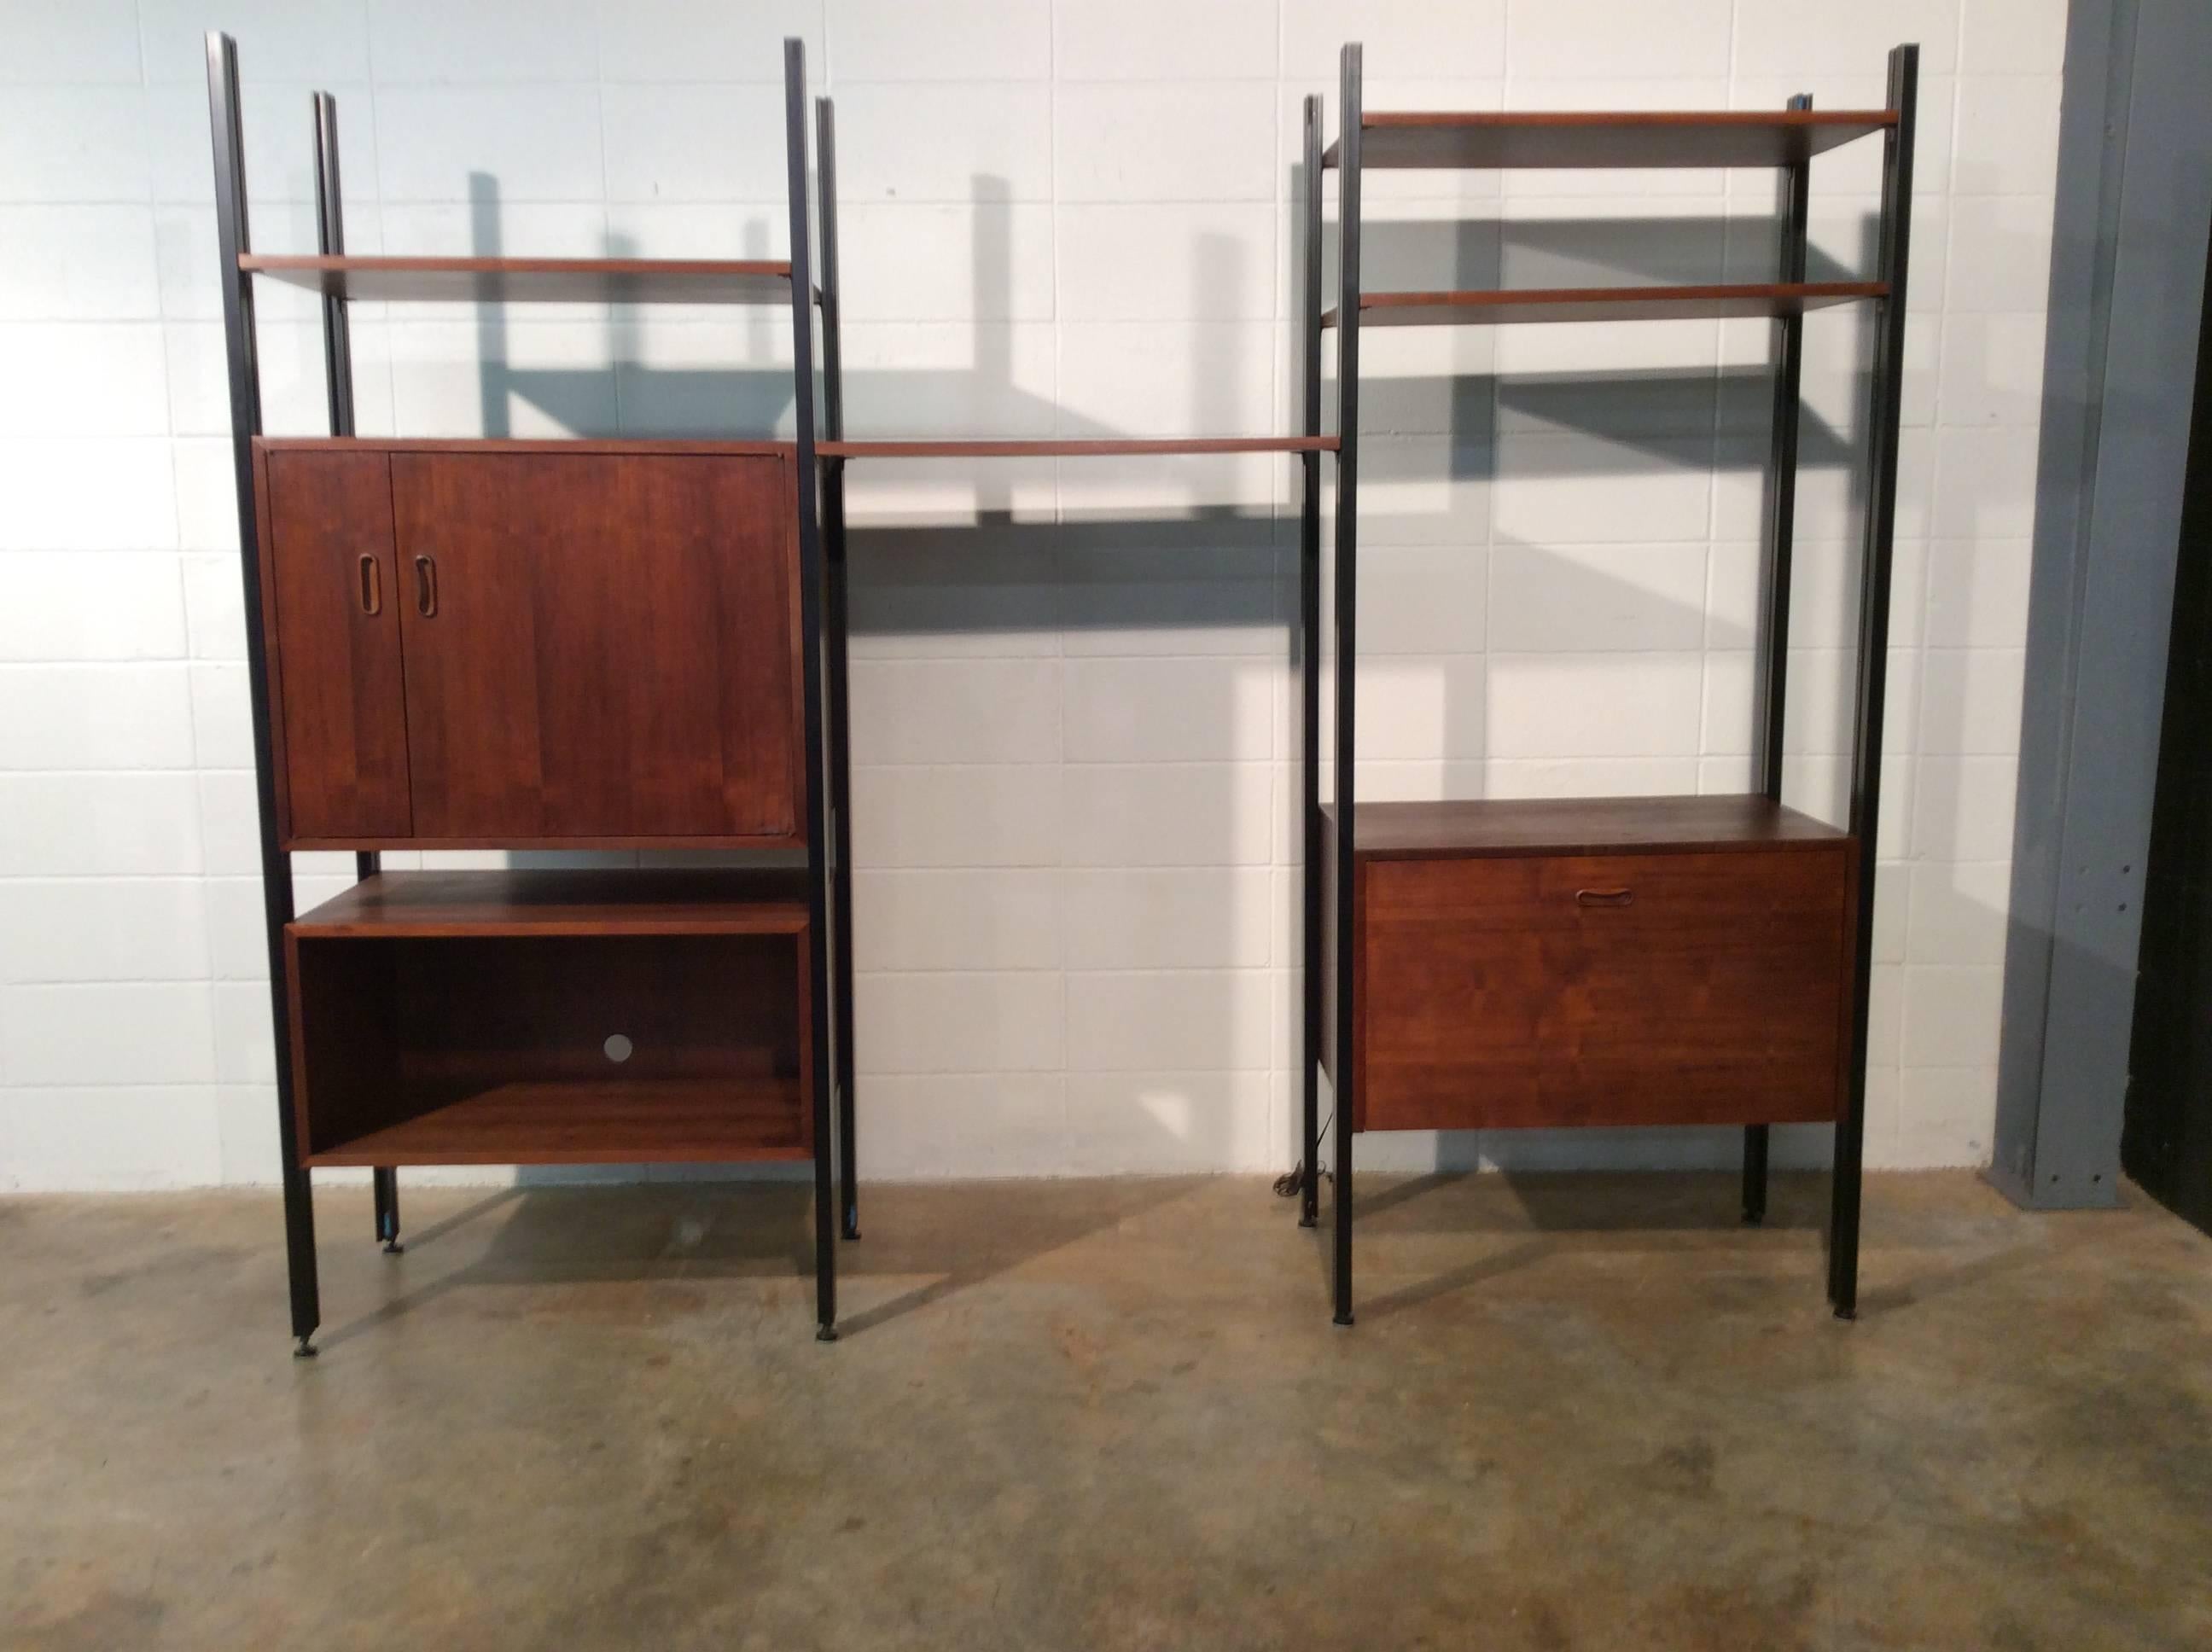 Mid-Century Modern walnut freestanding three bay Omni unit by George Nelson.
This freestanding unit includes eight poles, three different cabinets, four shelves, and mounting hardware for all of it.
All pieces are in good original condition. All